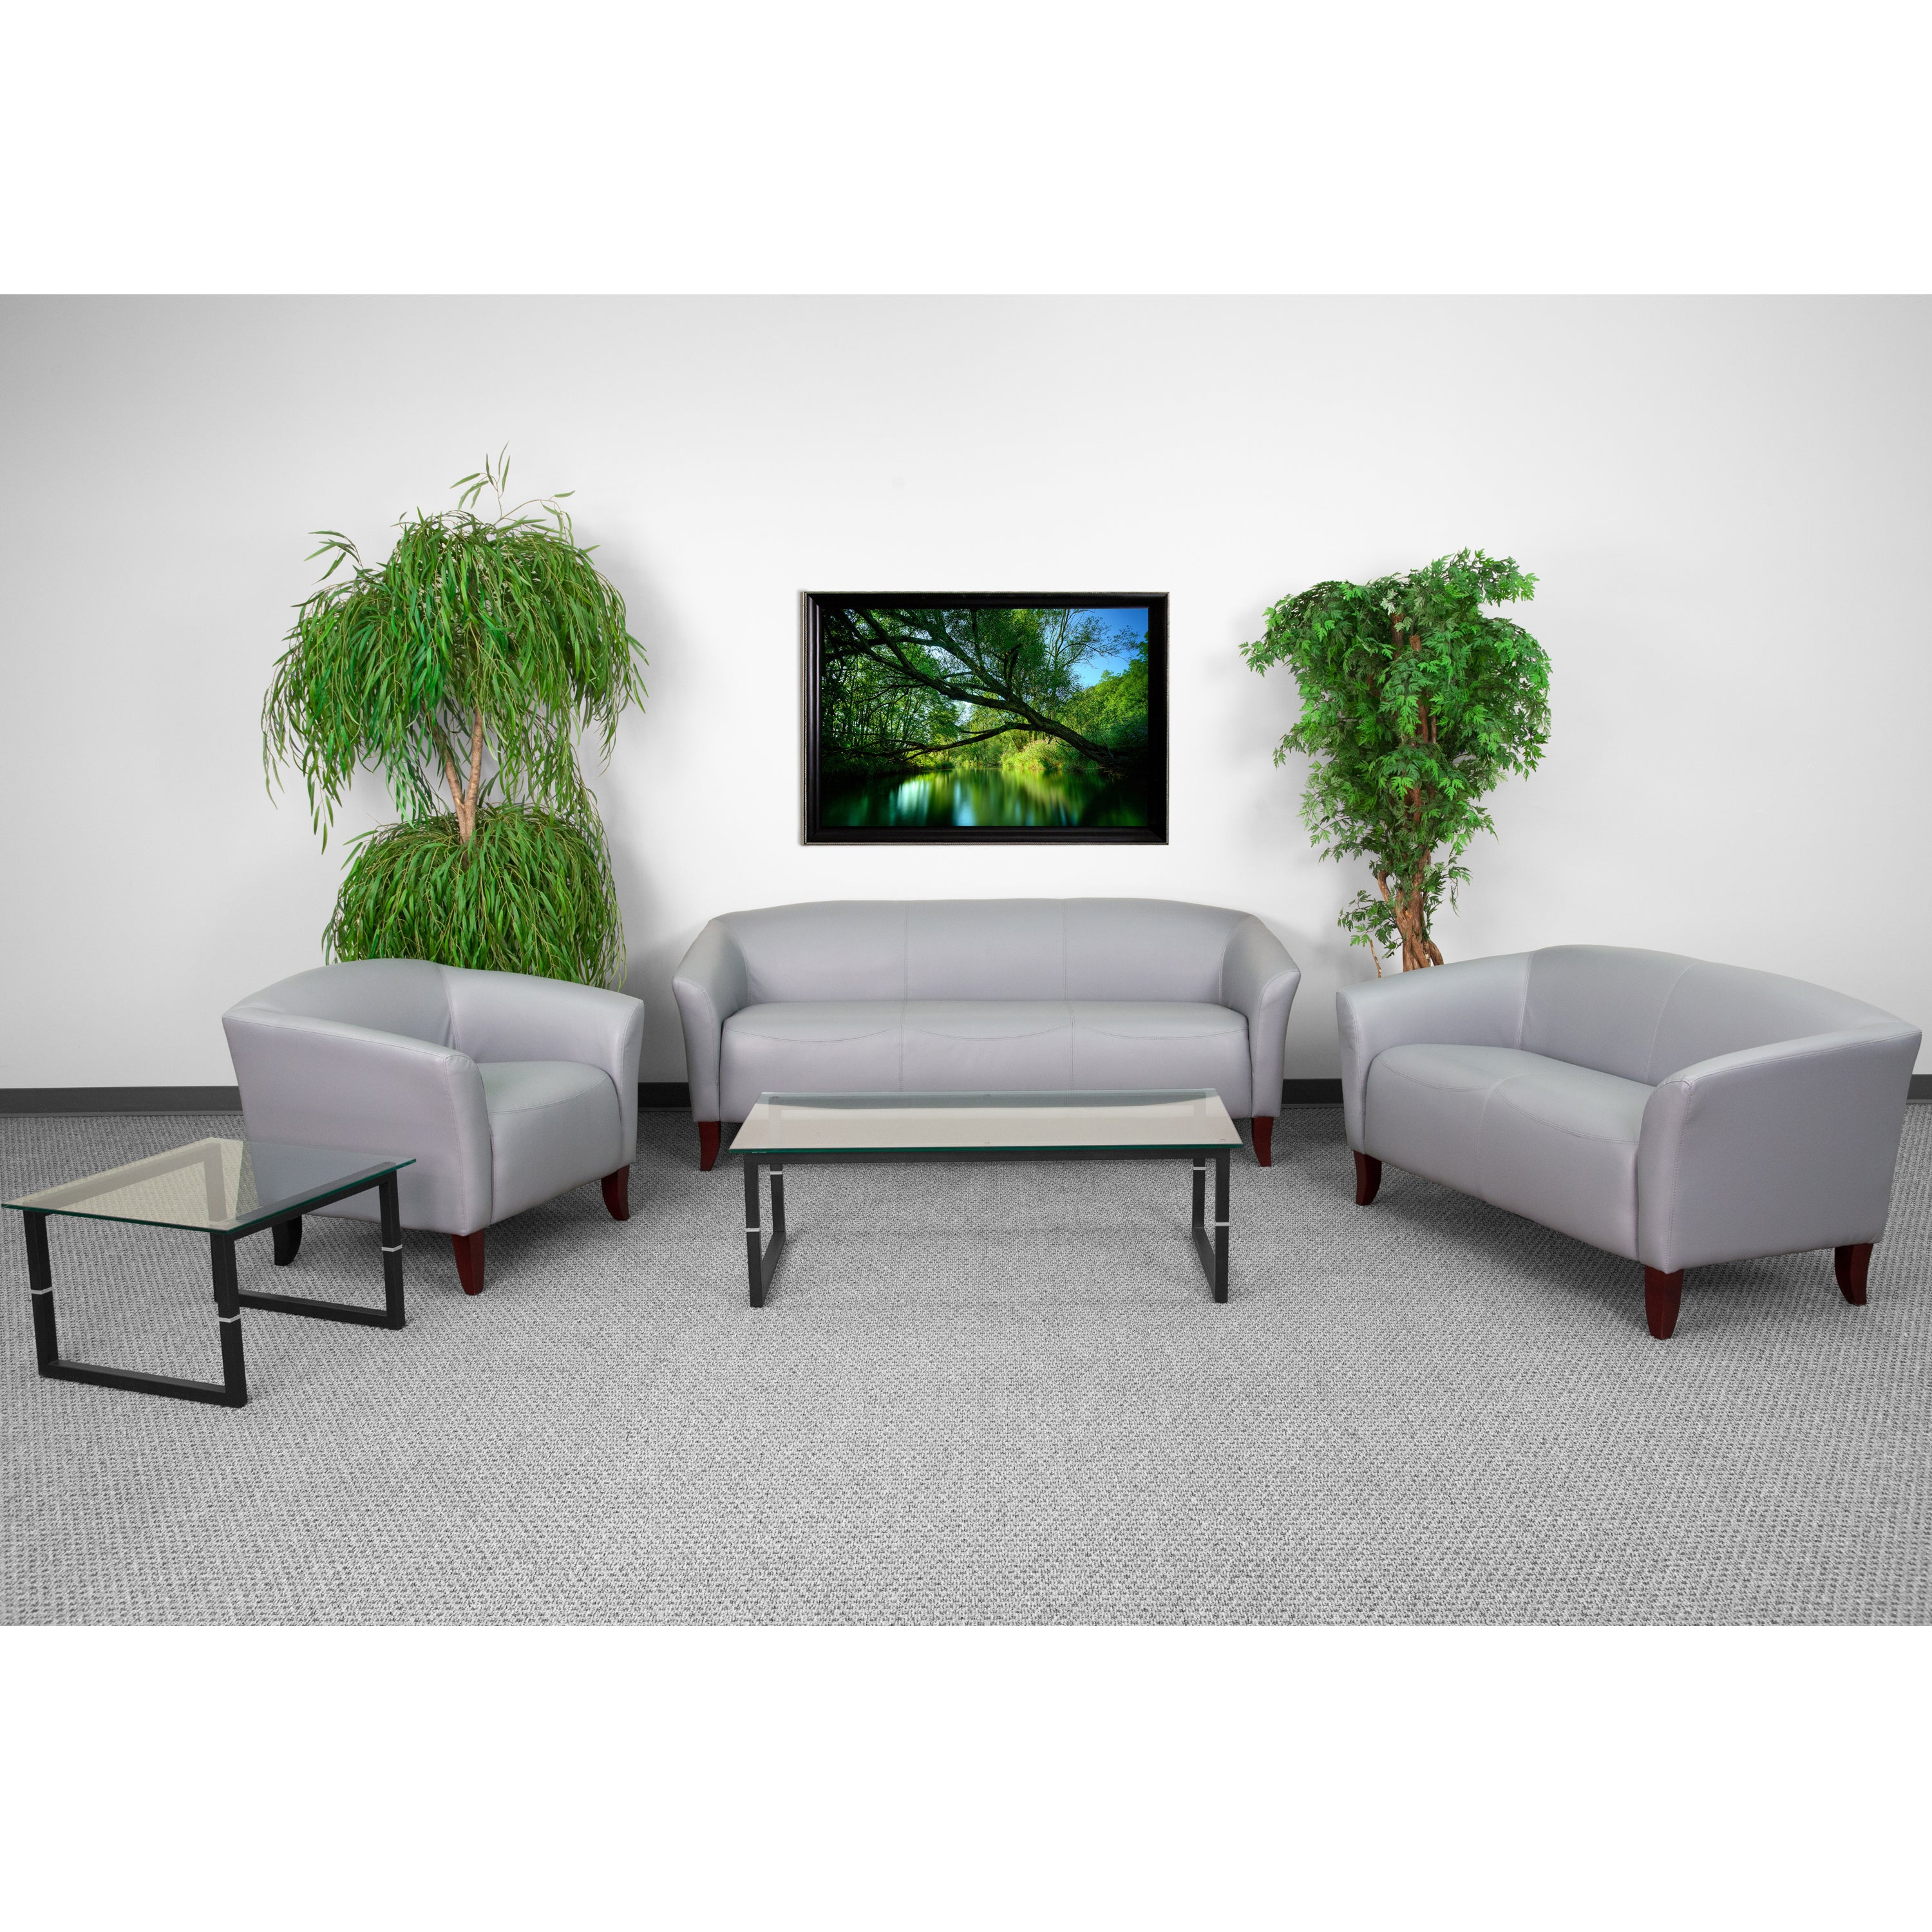 HERCULES Imperial Series Reception Set with Cherry Wood Feet-Reception Set-Flash Furniture-Wall2Wall Furnishings